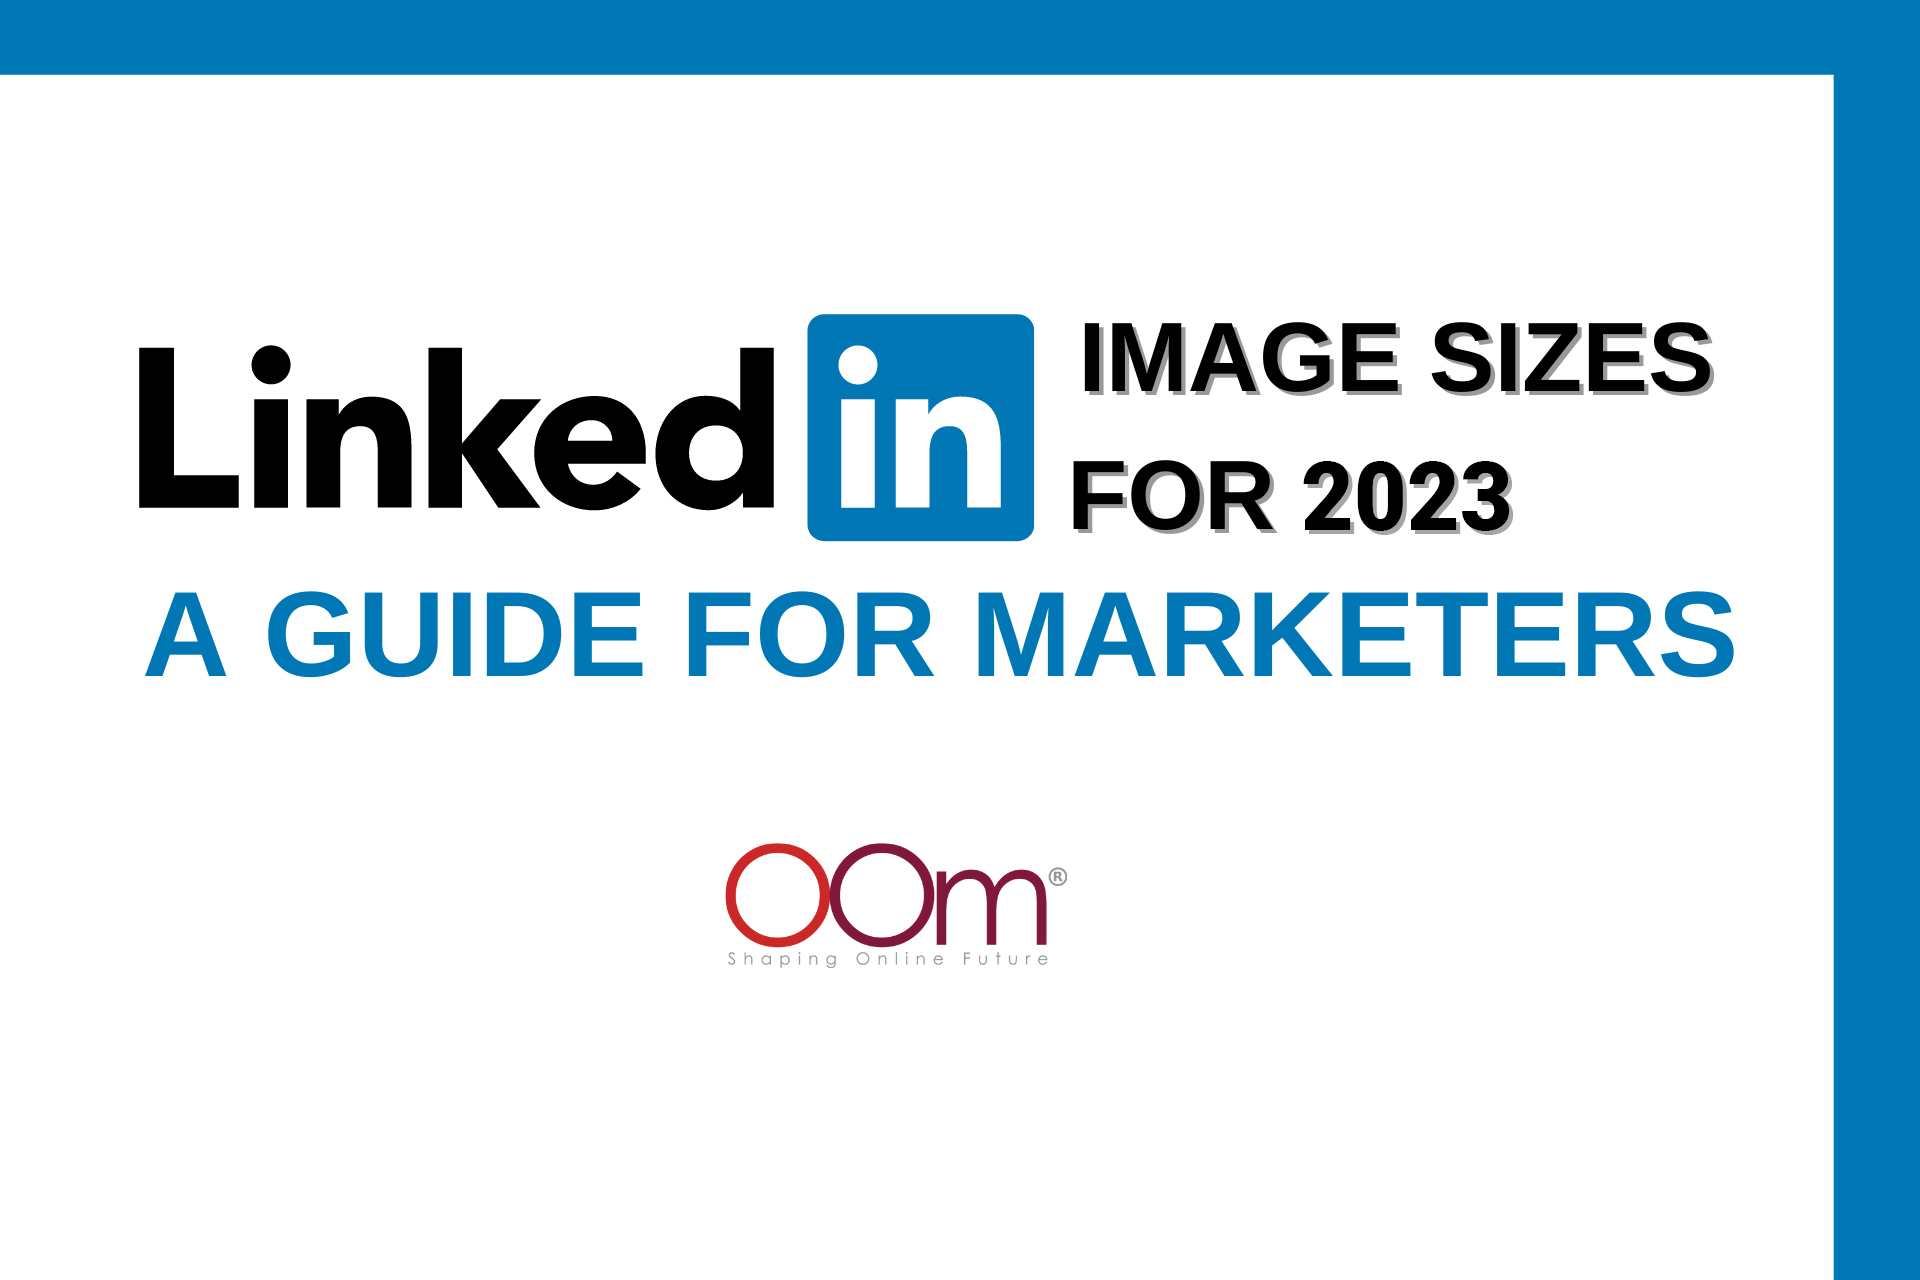 LinkedIn Image Sizes for 2023 A Guide For Marketers